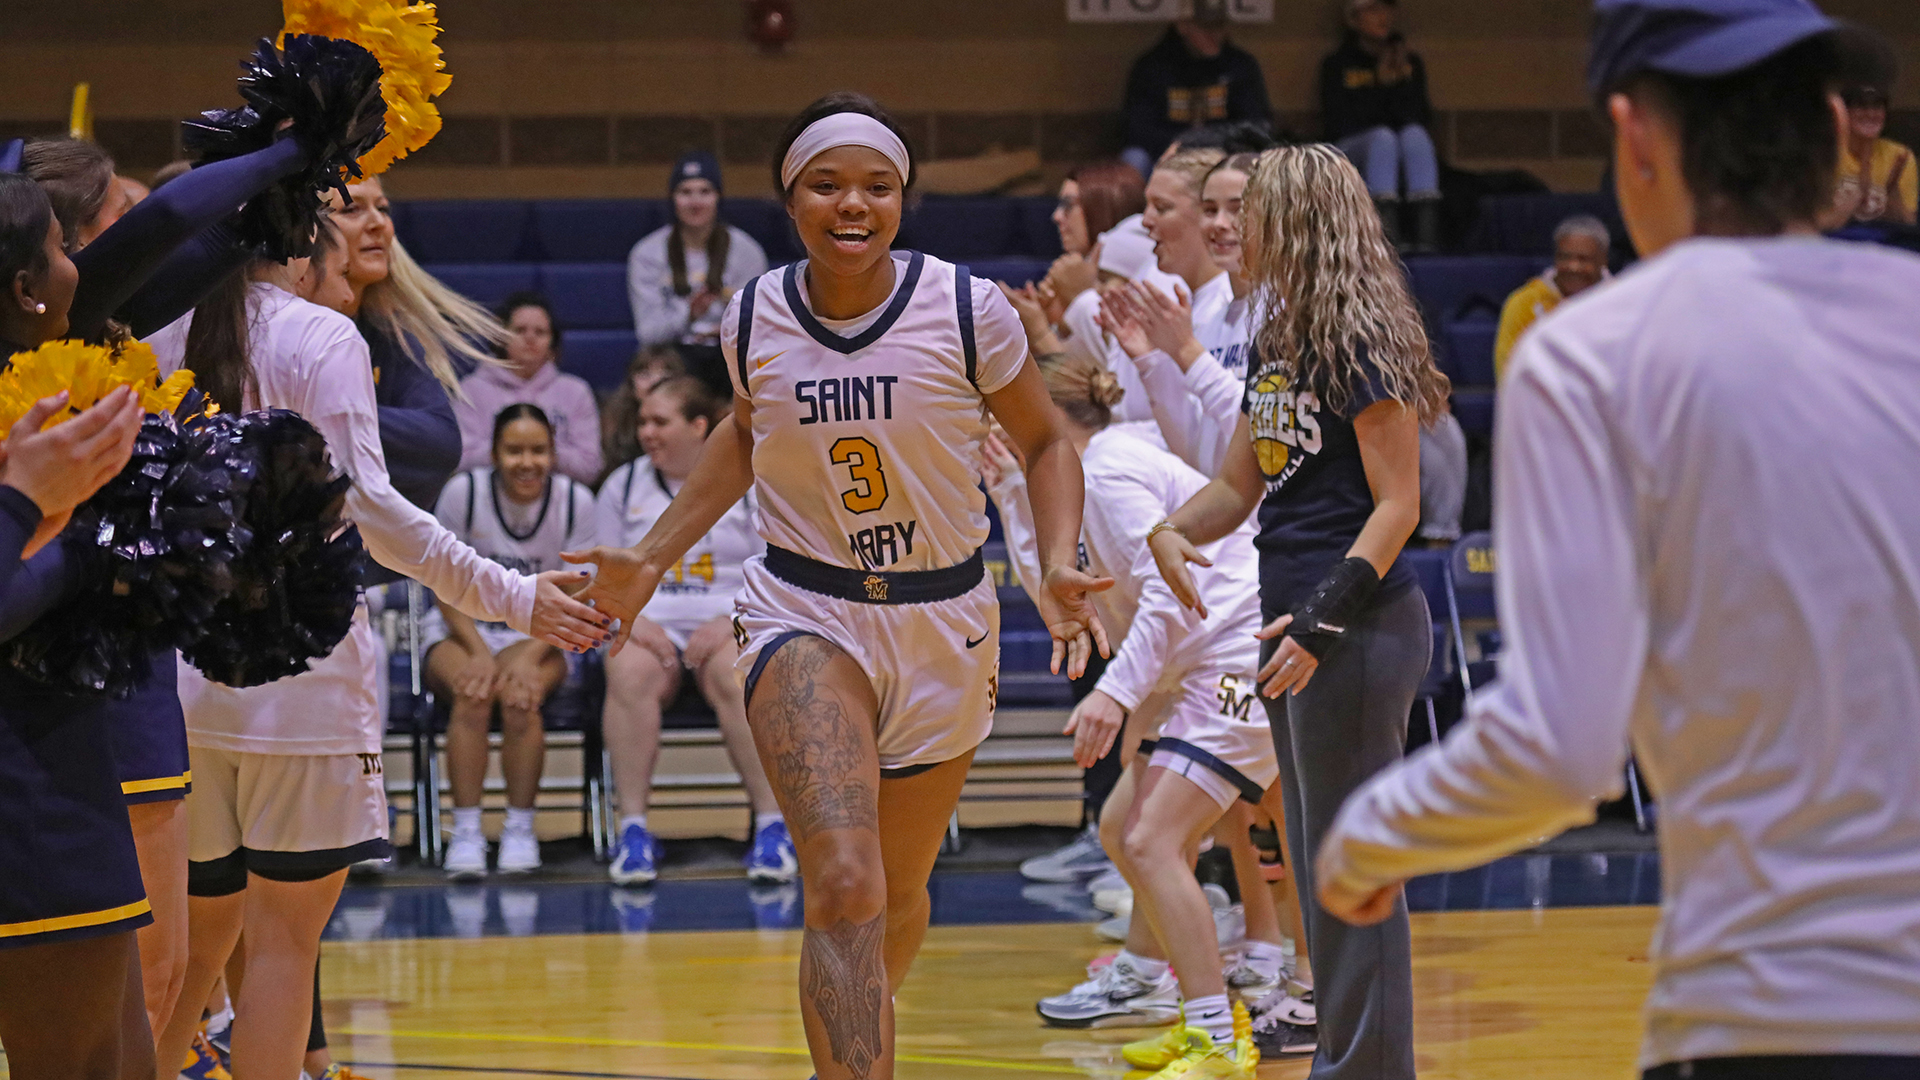 Five Spires Earn All-KCAC Awards, Sims Named POTY